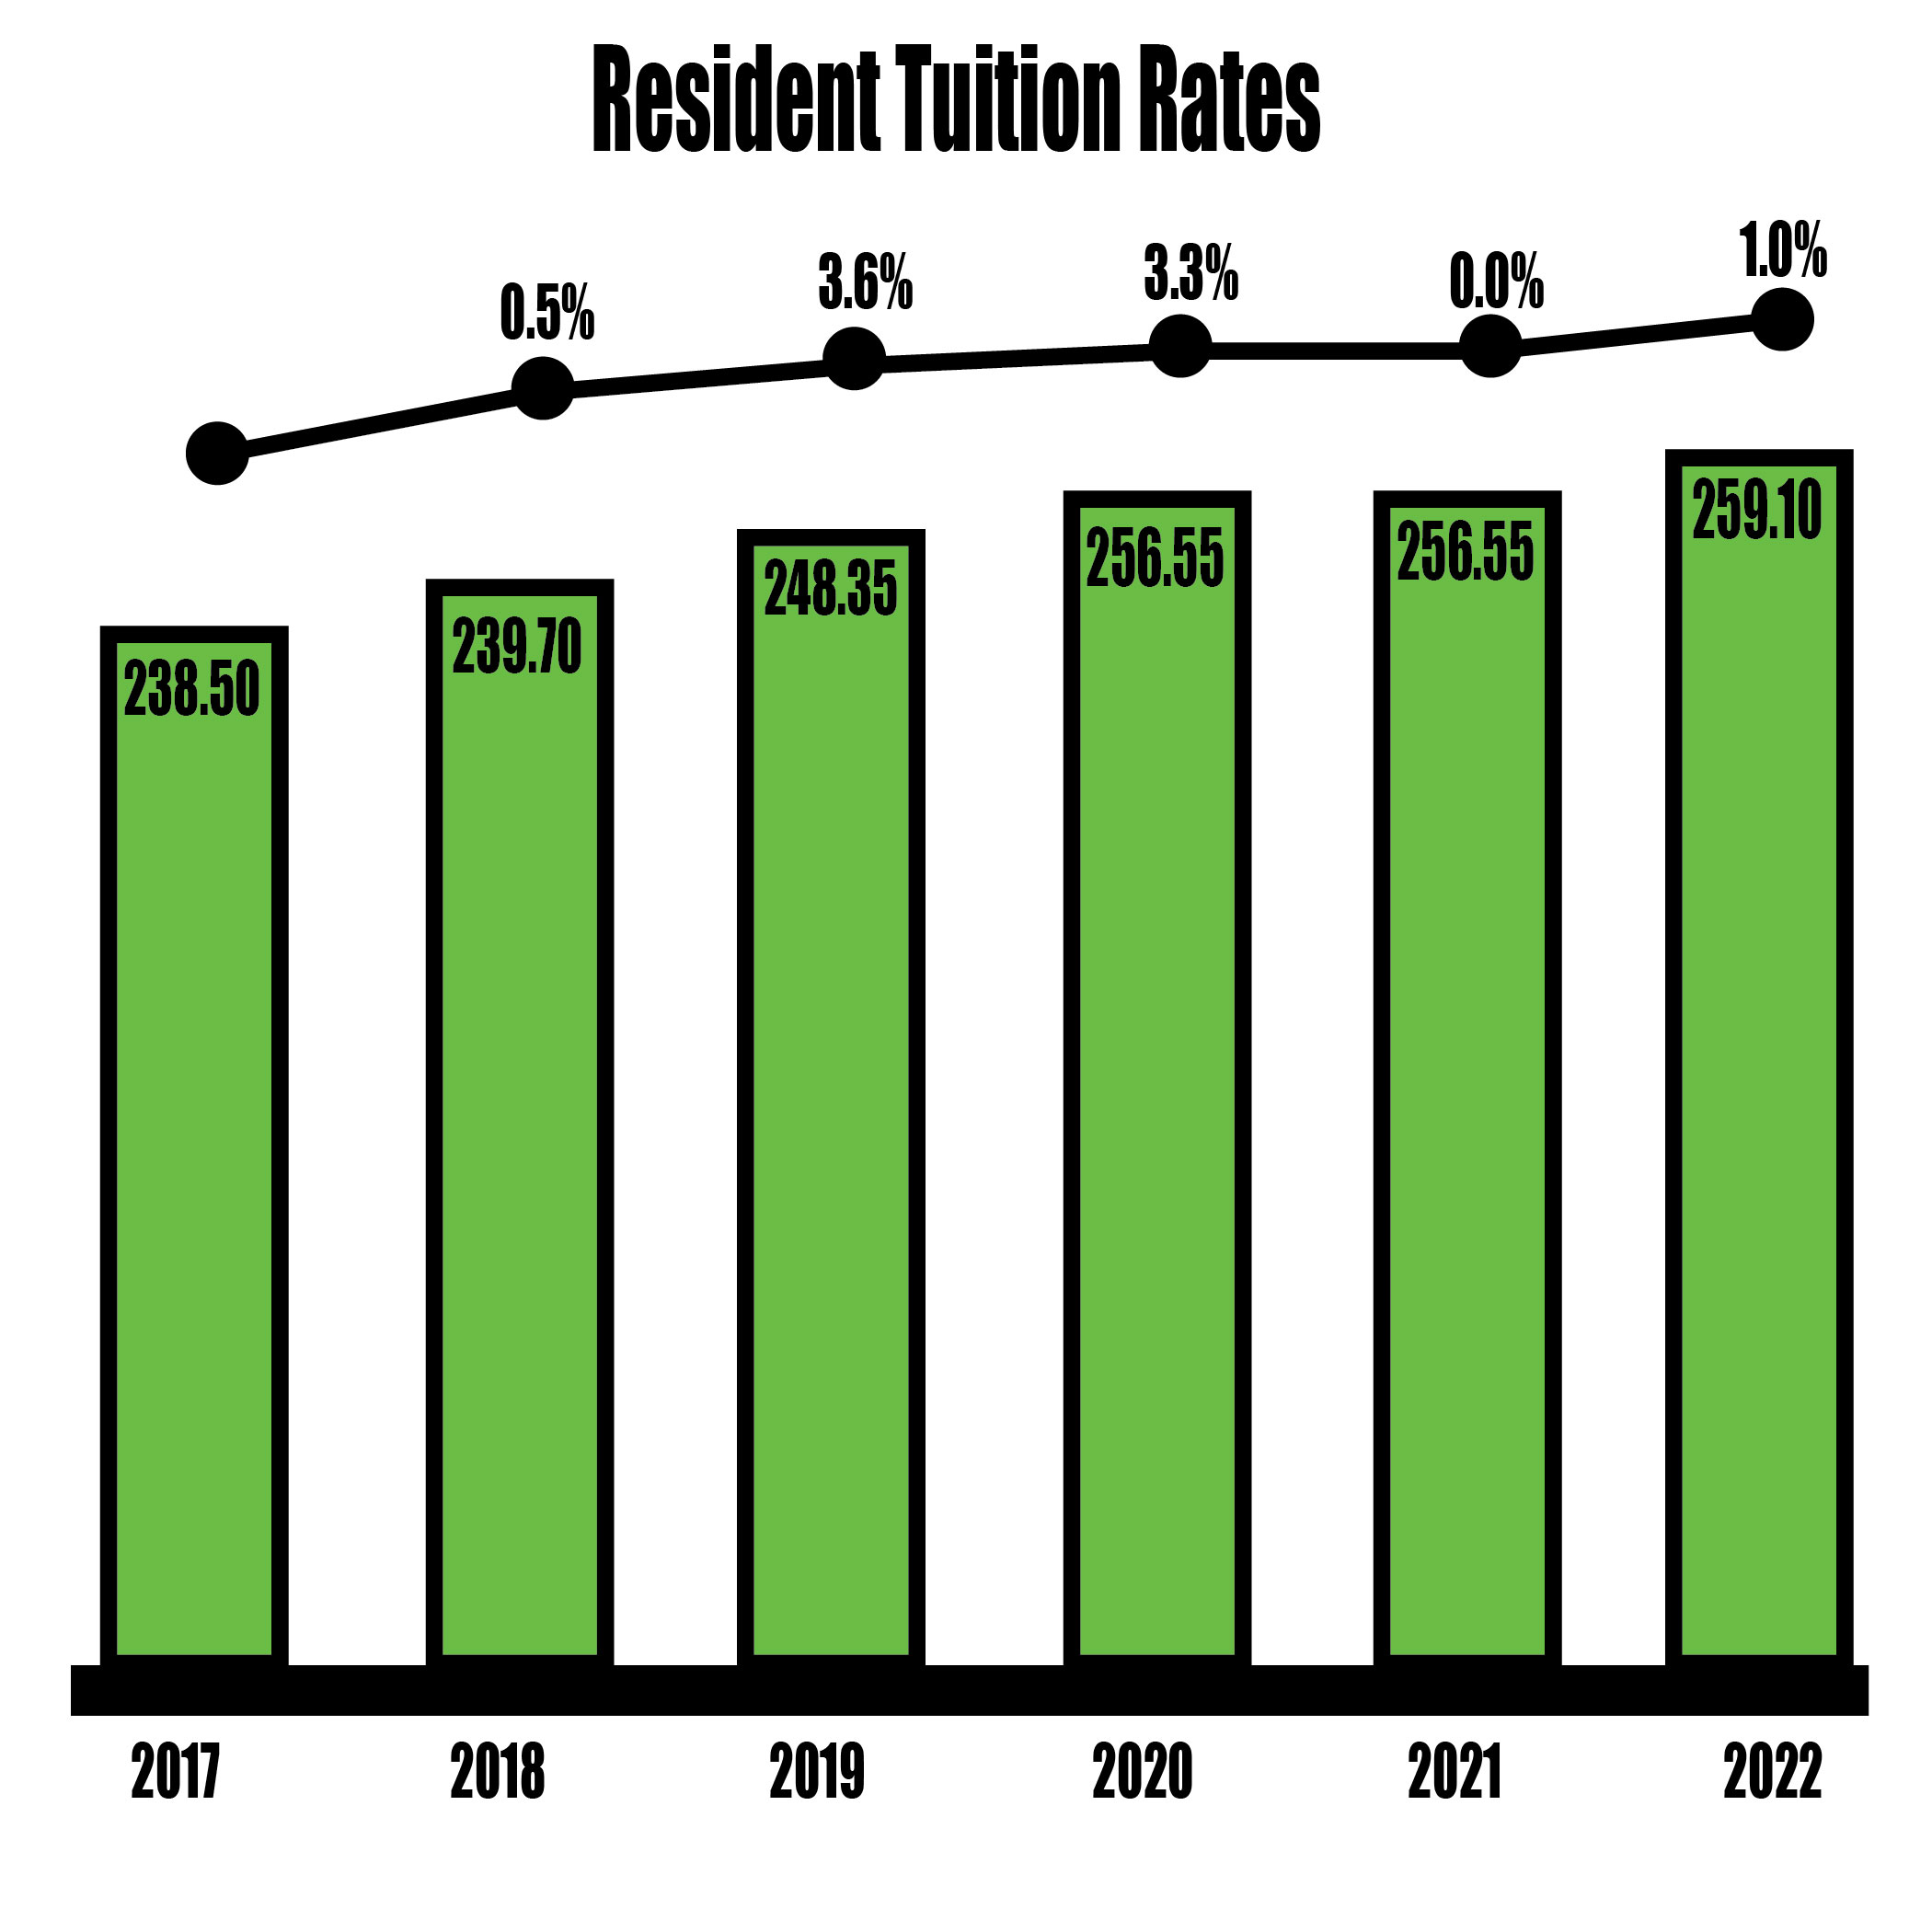 SDBOR tuition increase set for the fall